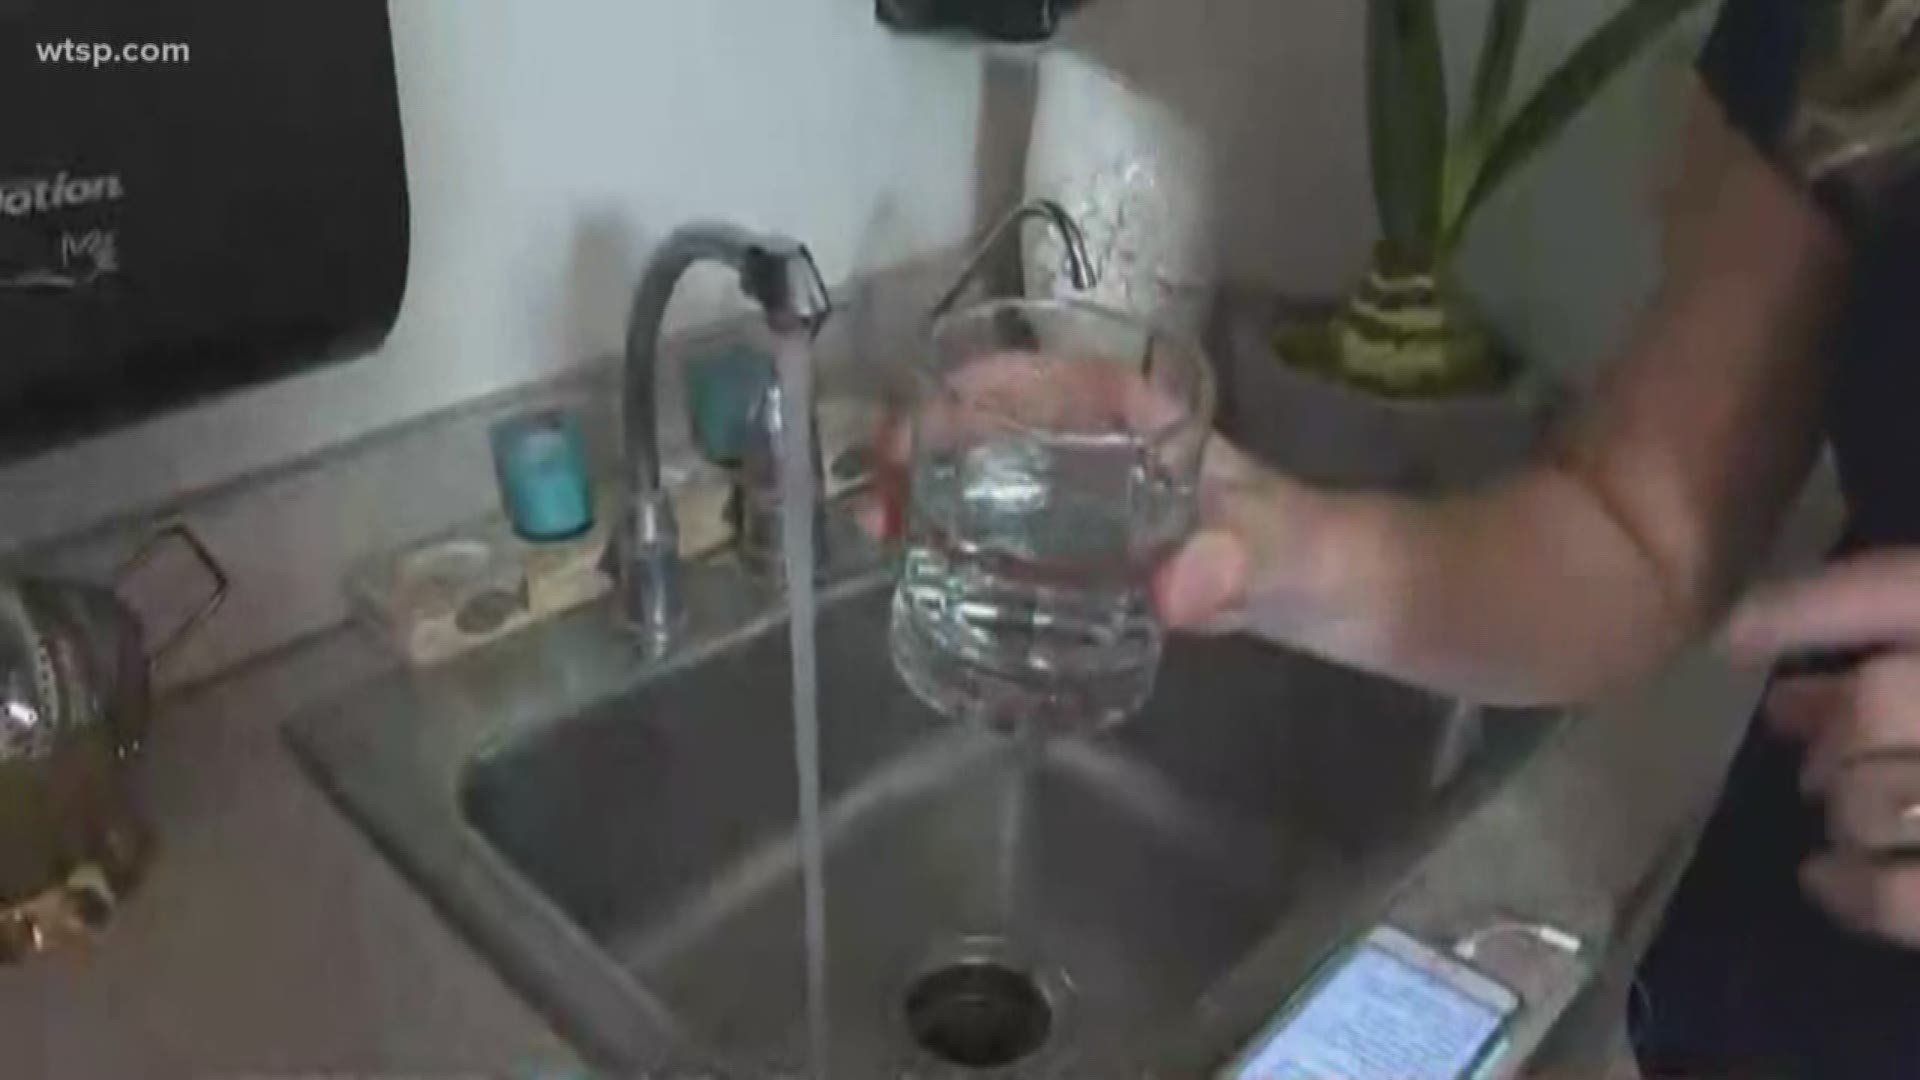 A new report by the non-profit Environmental Working Group and Northeastern University found people in nearly every state in the country are exposed to unhealthy drinking water.